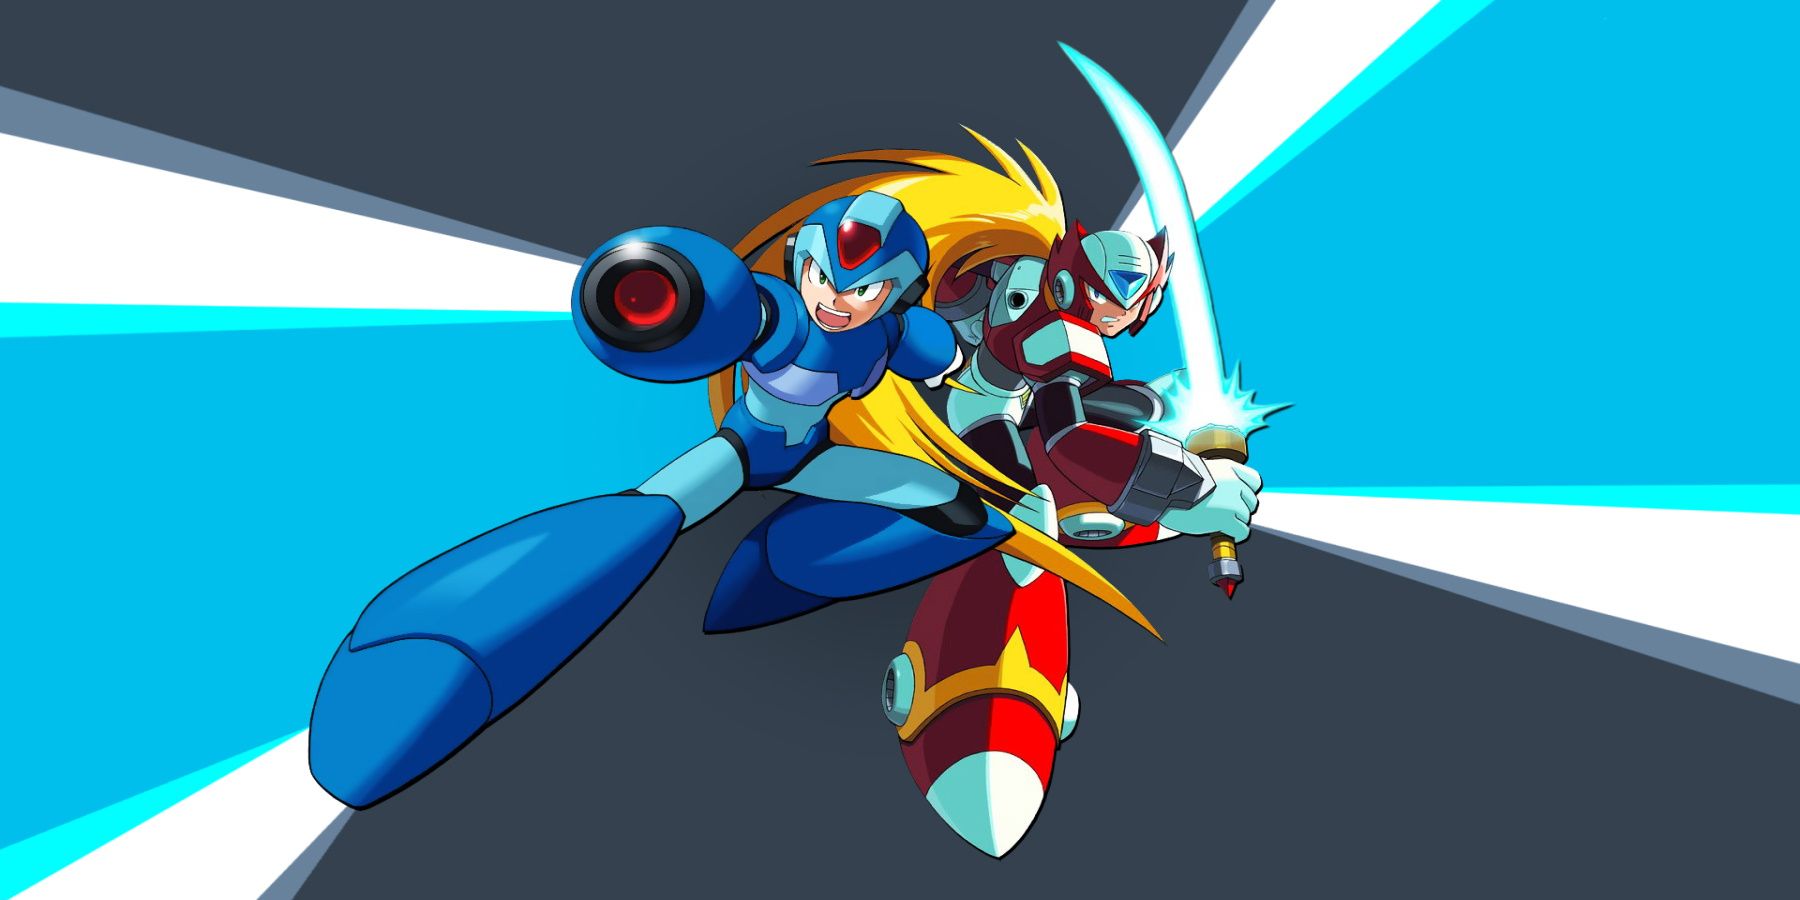 A New Retro-Styled Mega Man X Game Could be Huge